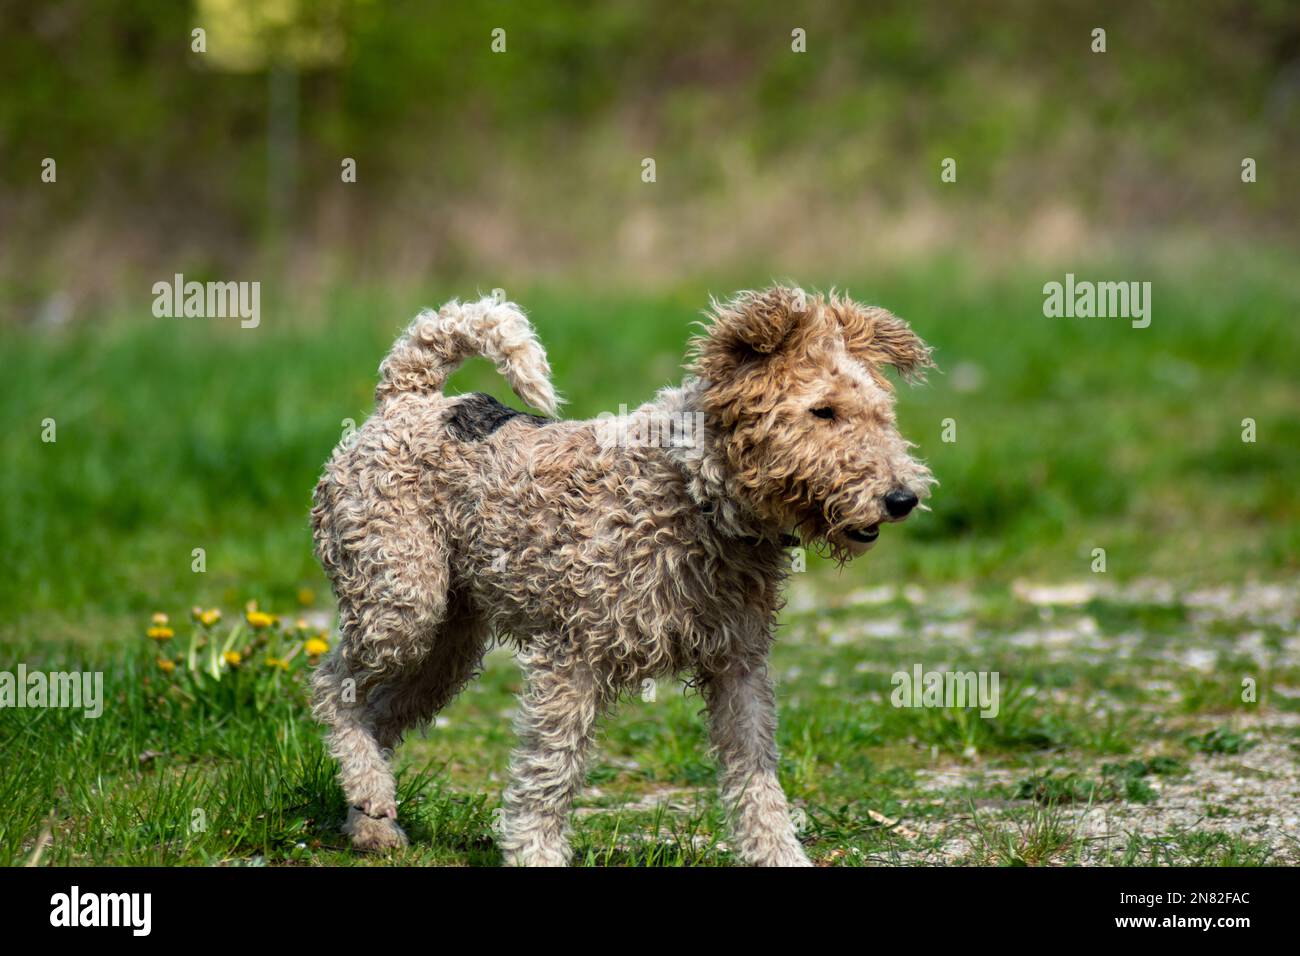 Fox terrier dog just got out of the mud Stock Photo